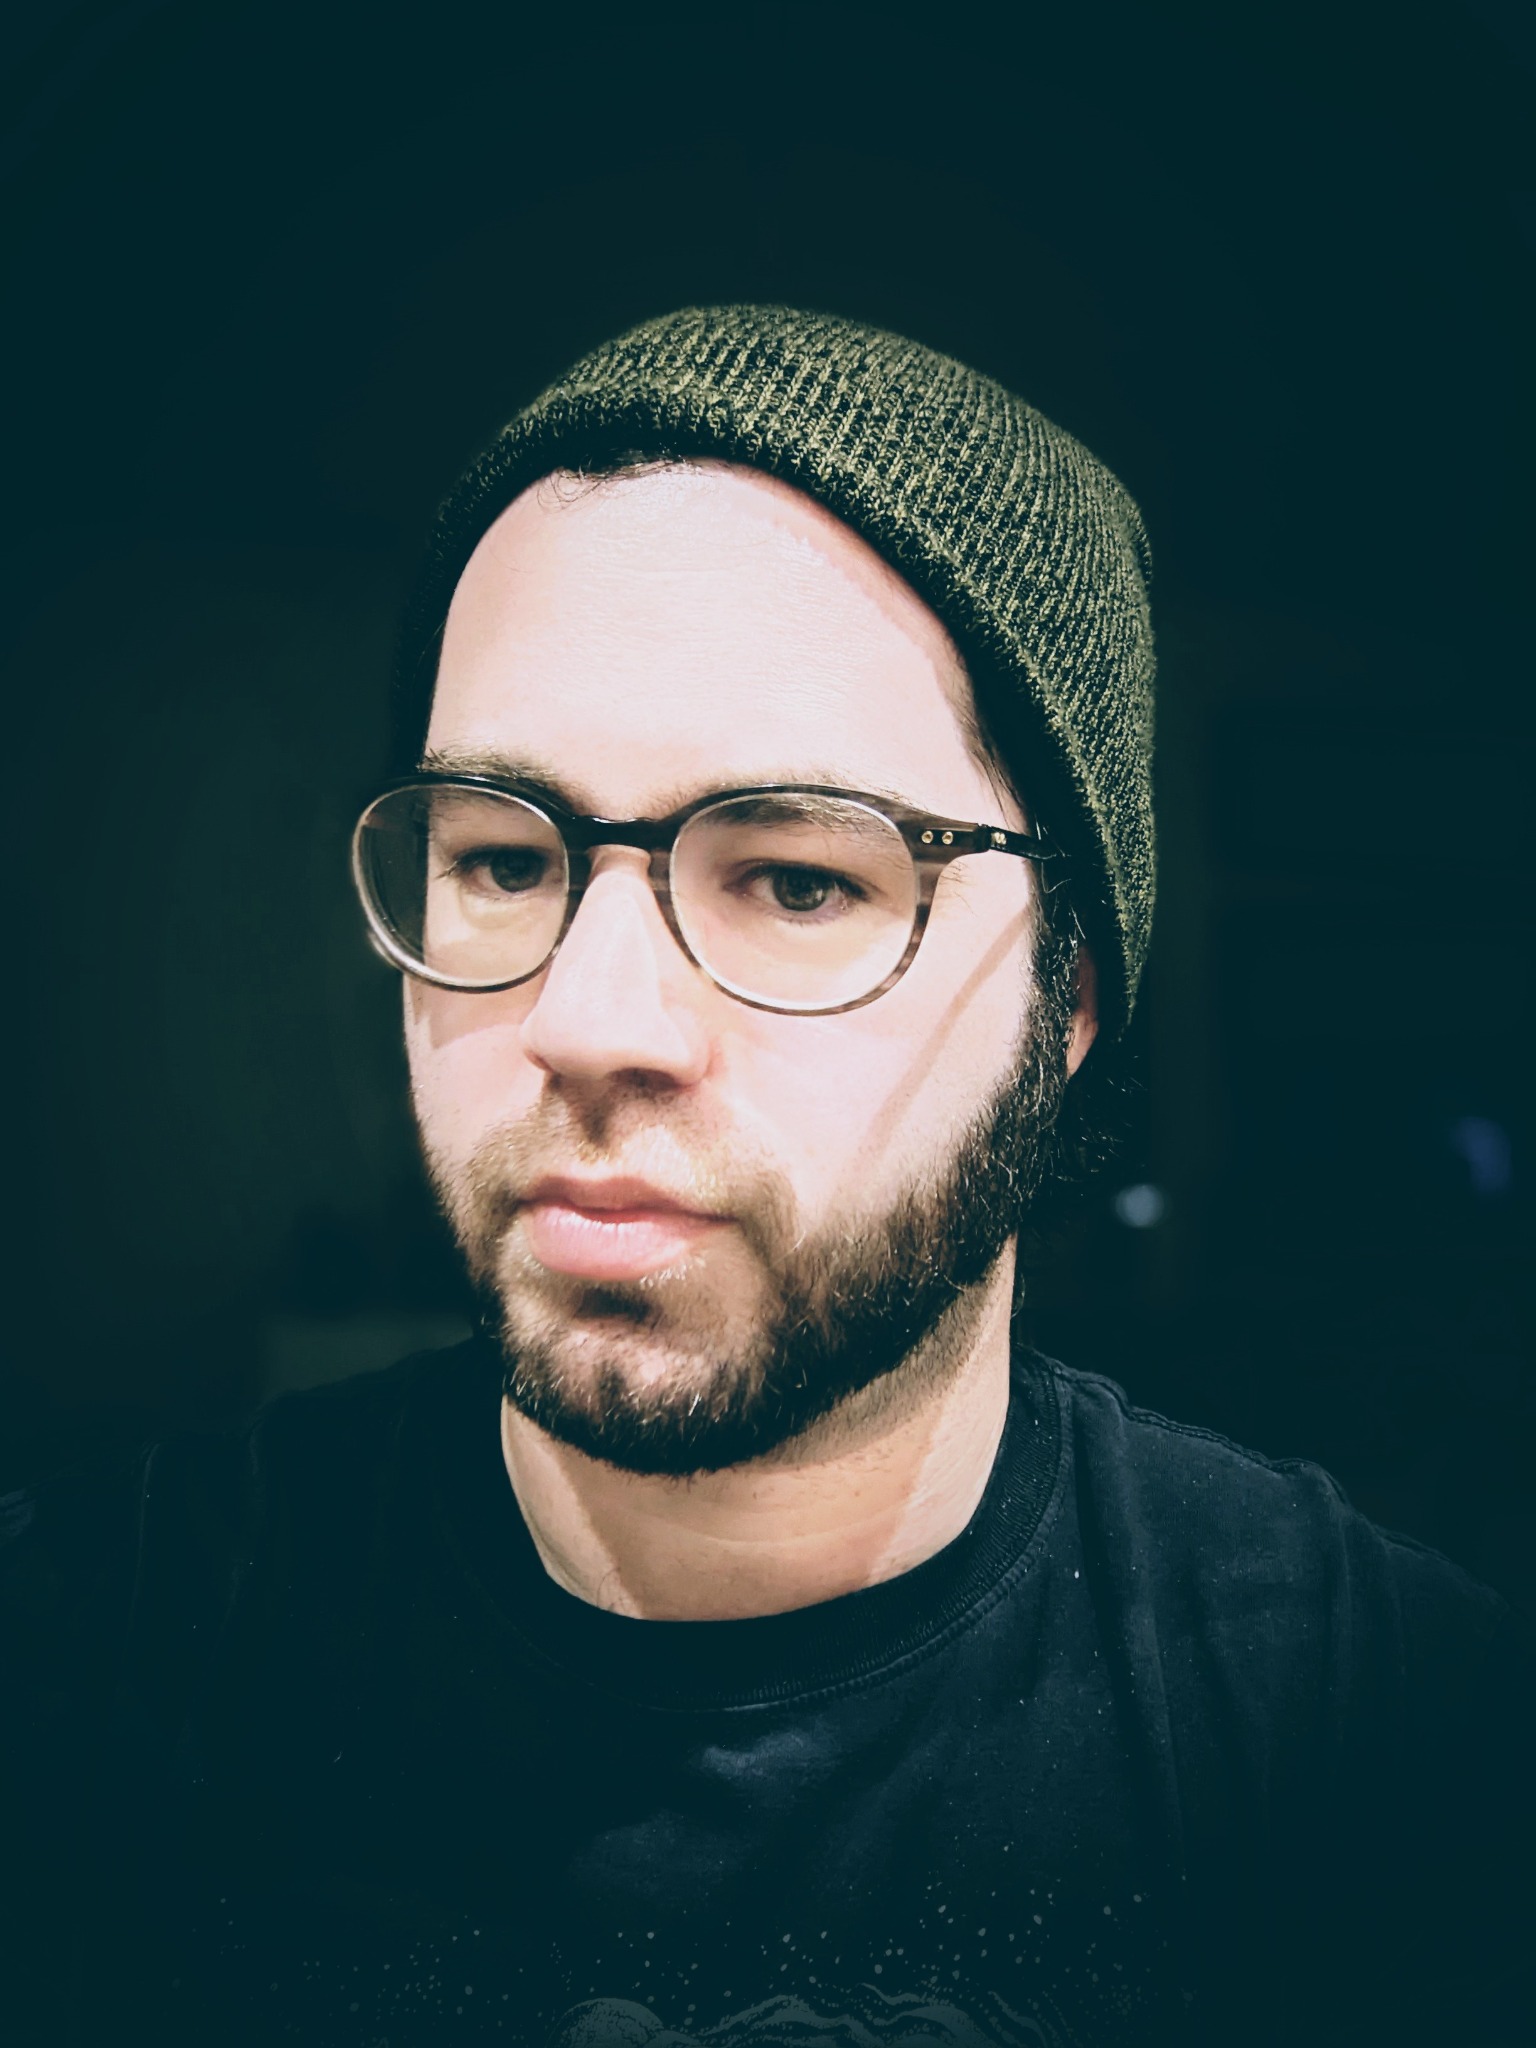 A portrait of a white man with glasses and a beard wearing a green knit cap